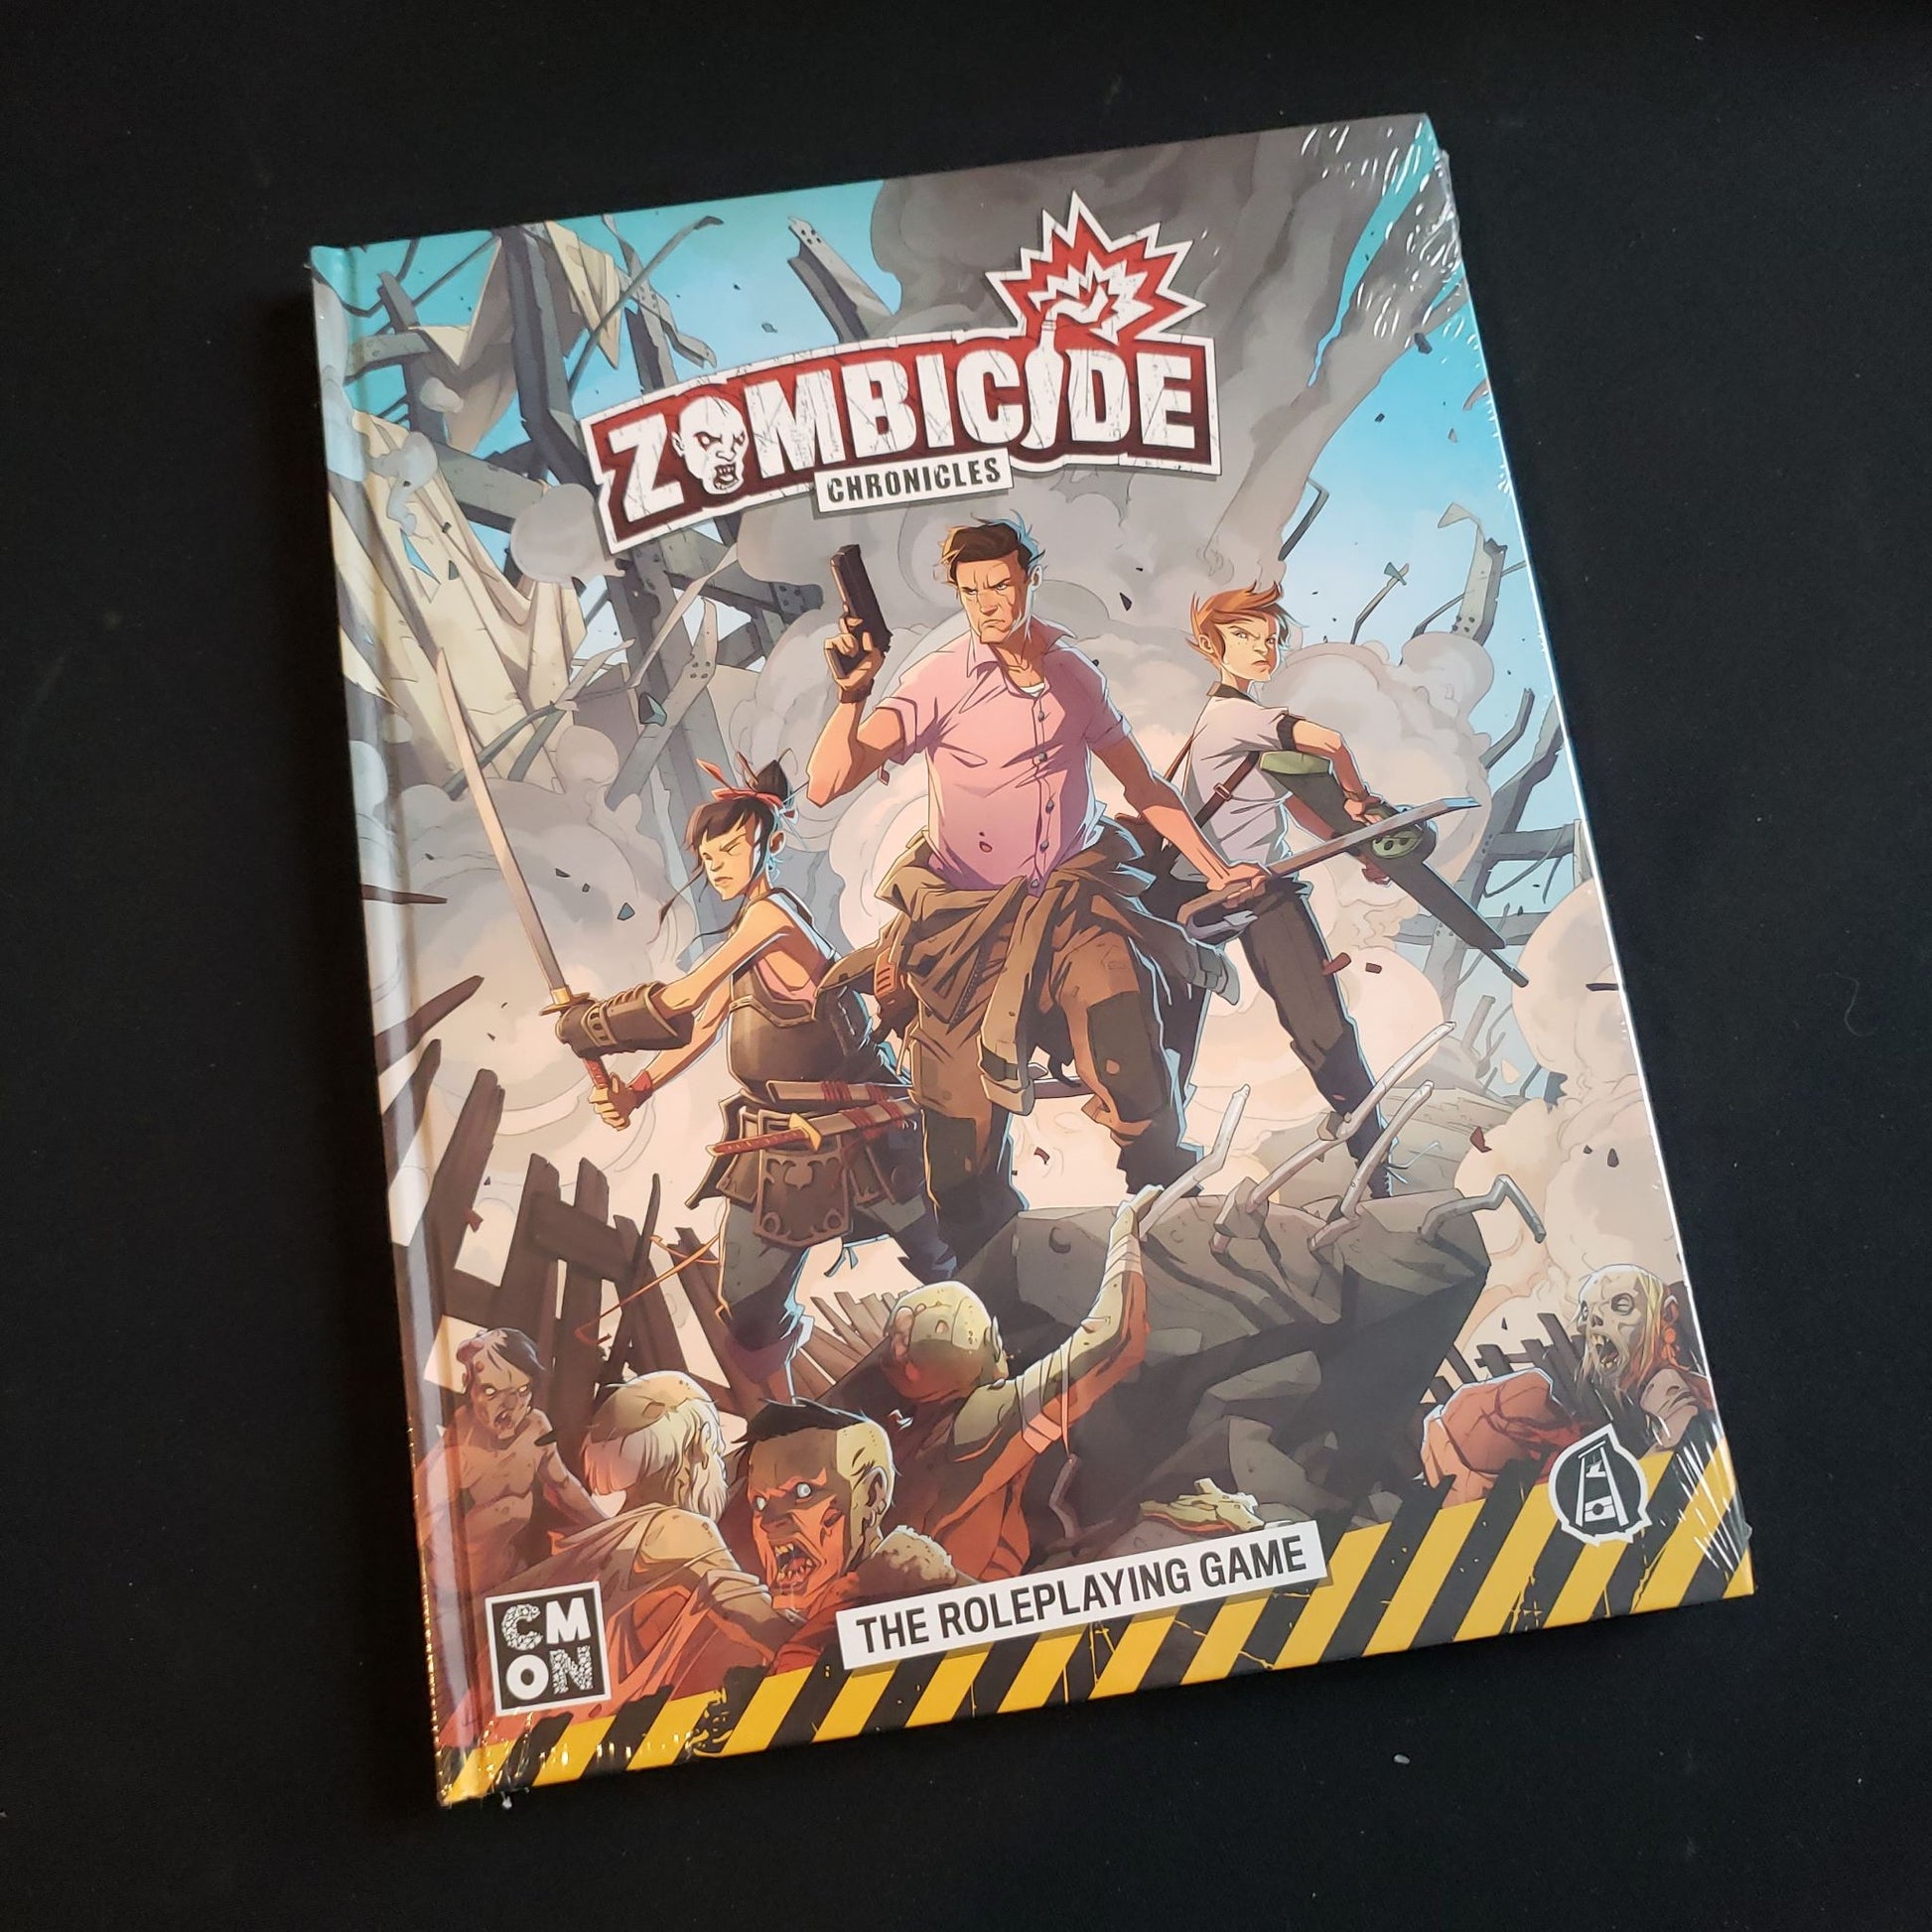 Image shows the front cover of the Core Rulebook for the Zombicide Chronicles roleplaying game